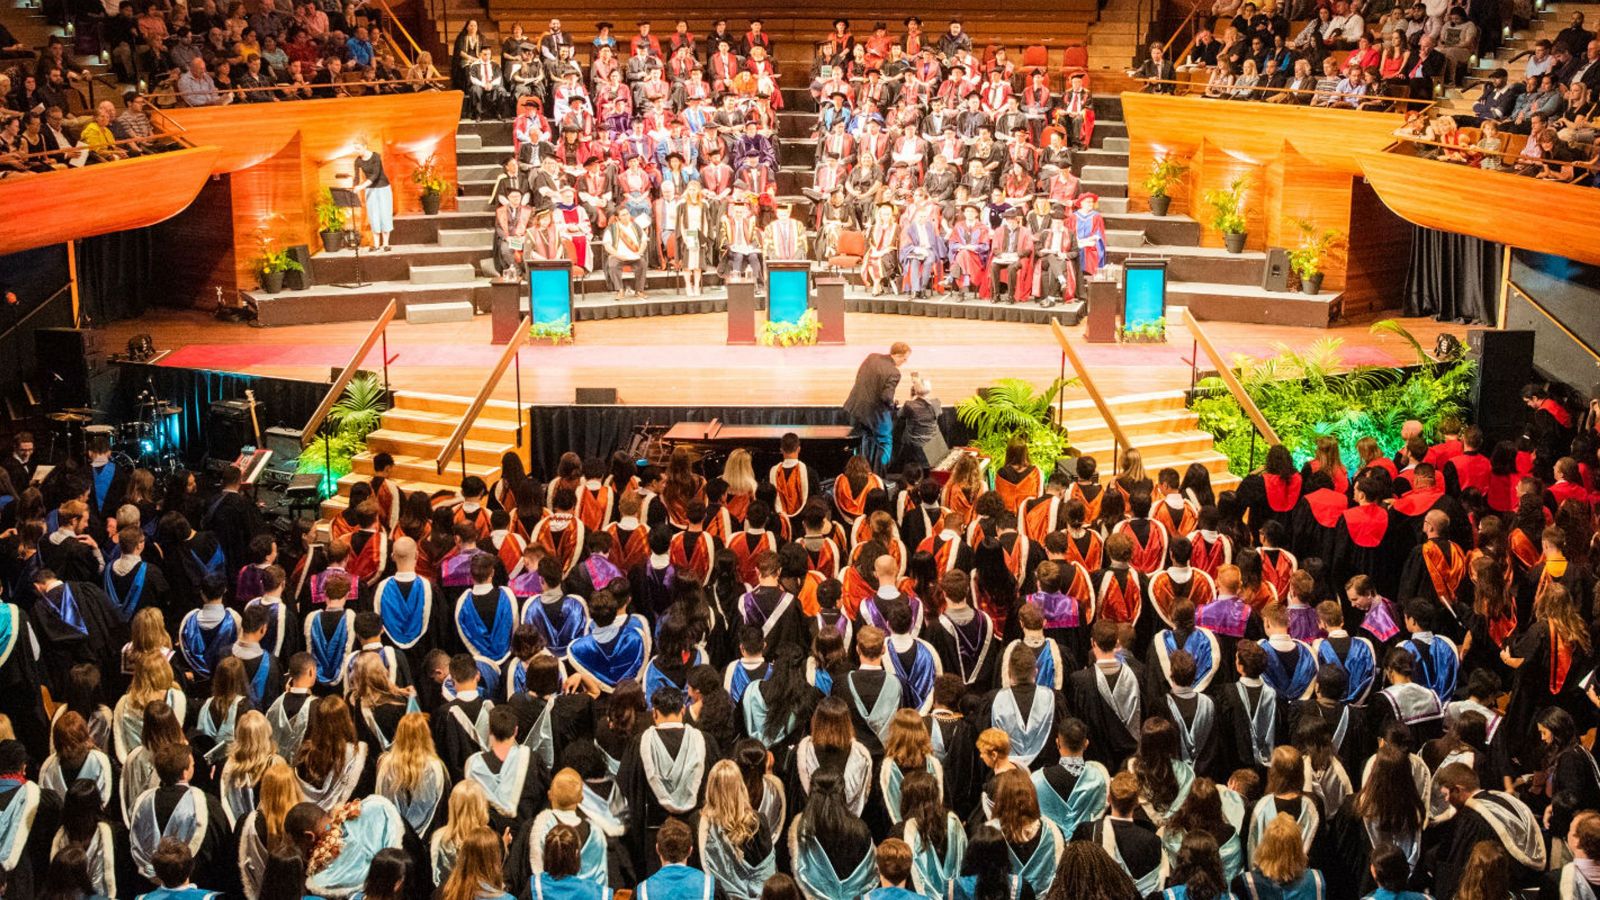 Aerial photograph of a large indoor graduation ceremony.